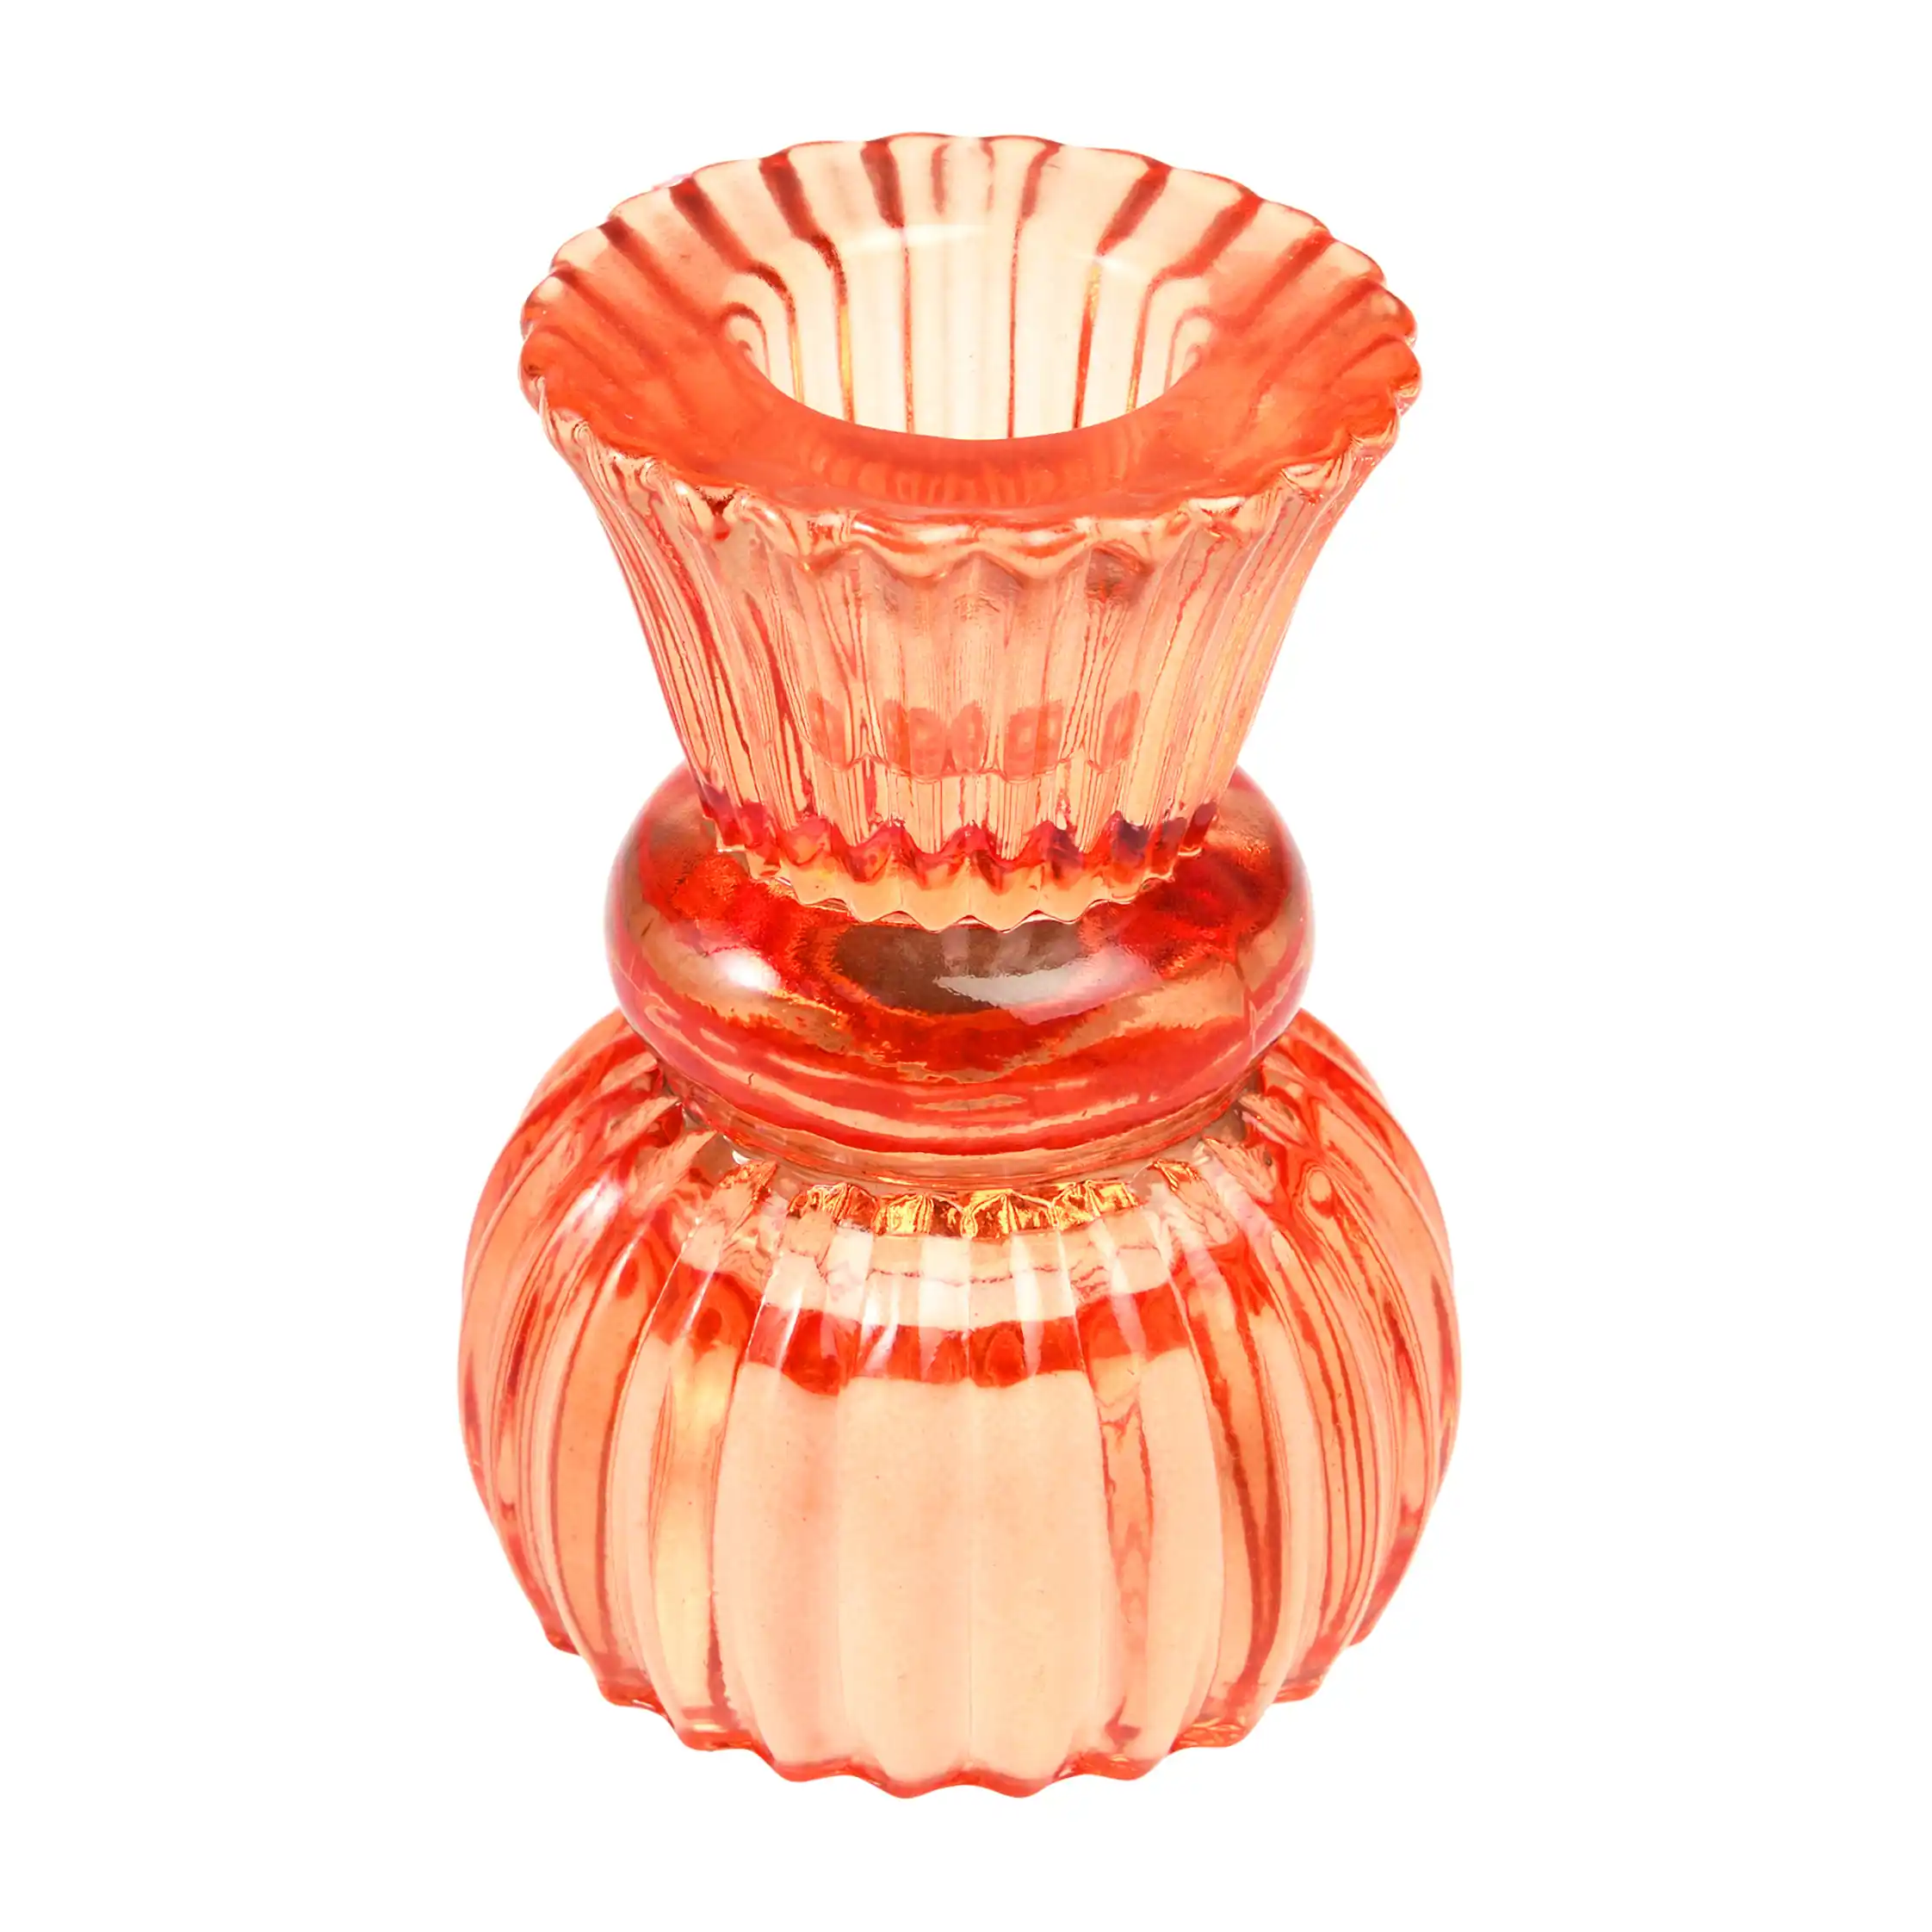 double ended glass candle holder - orange